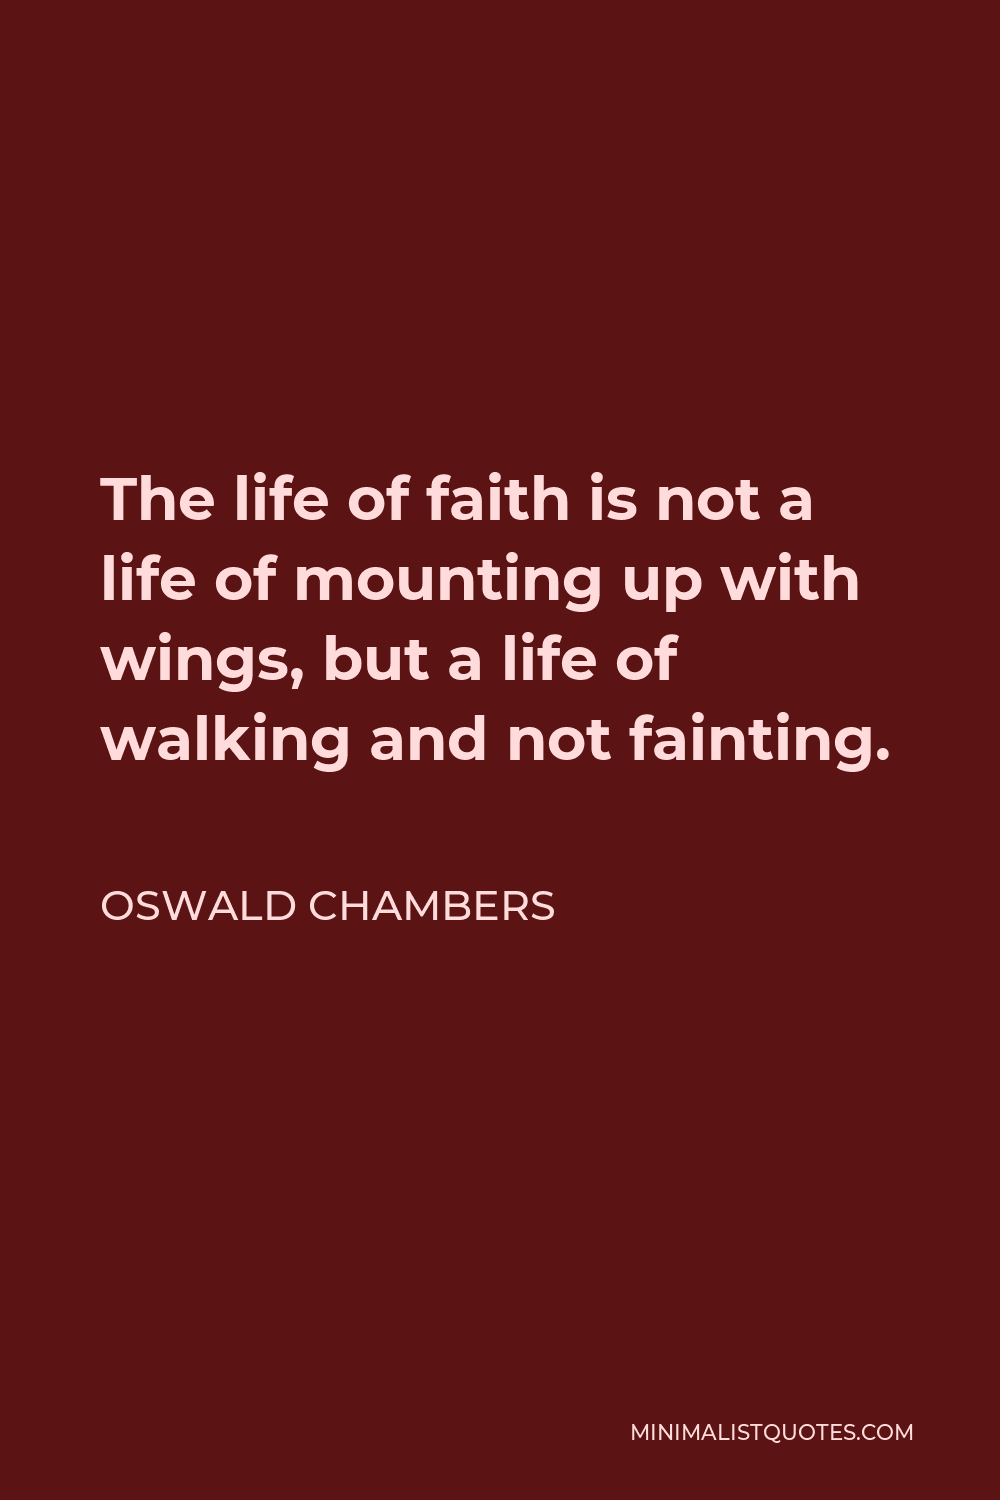 Oswald Chambers Quote - The life of faith is not a life of mounting up with wings, but a life of walking and not fainting.